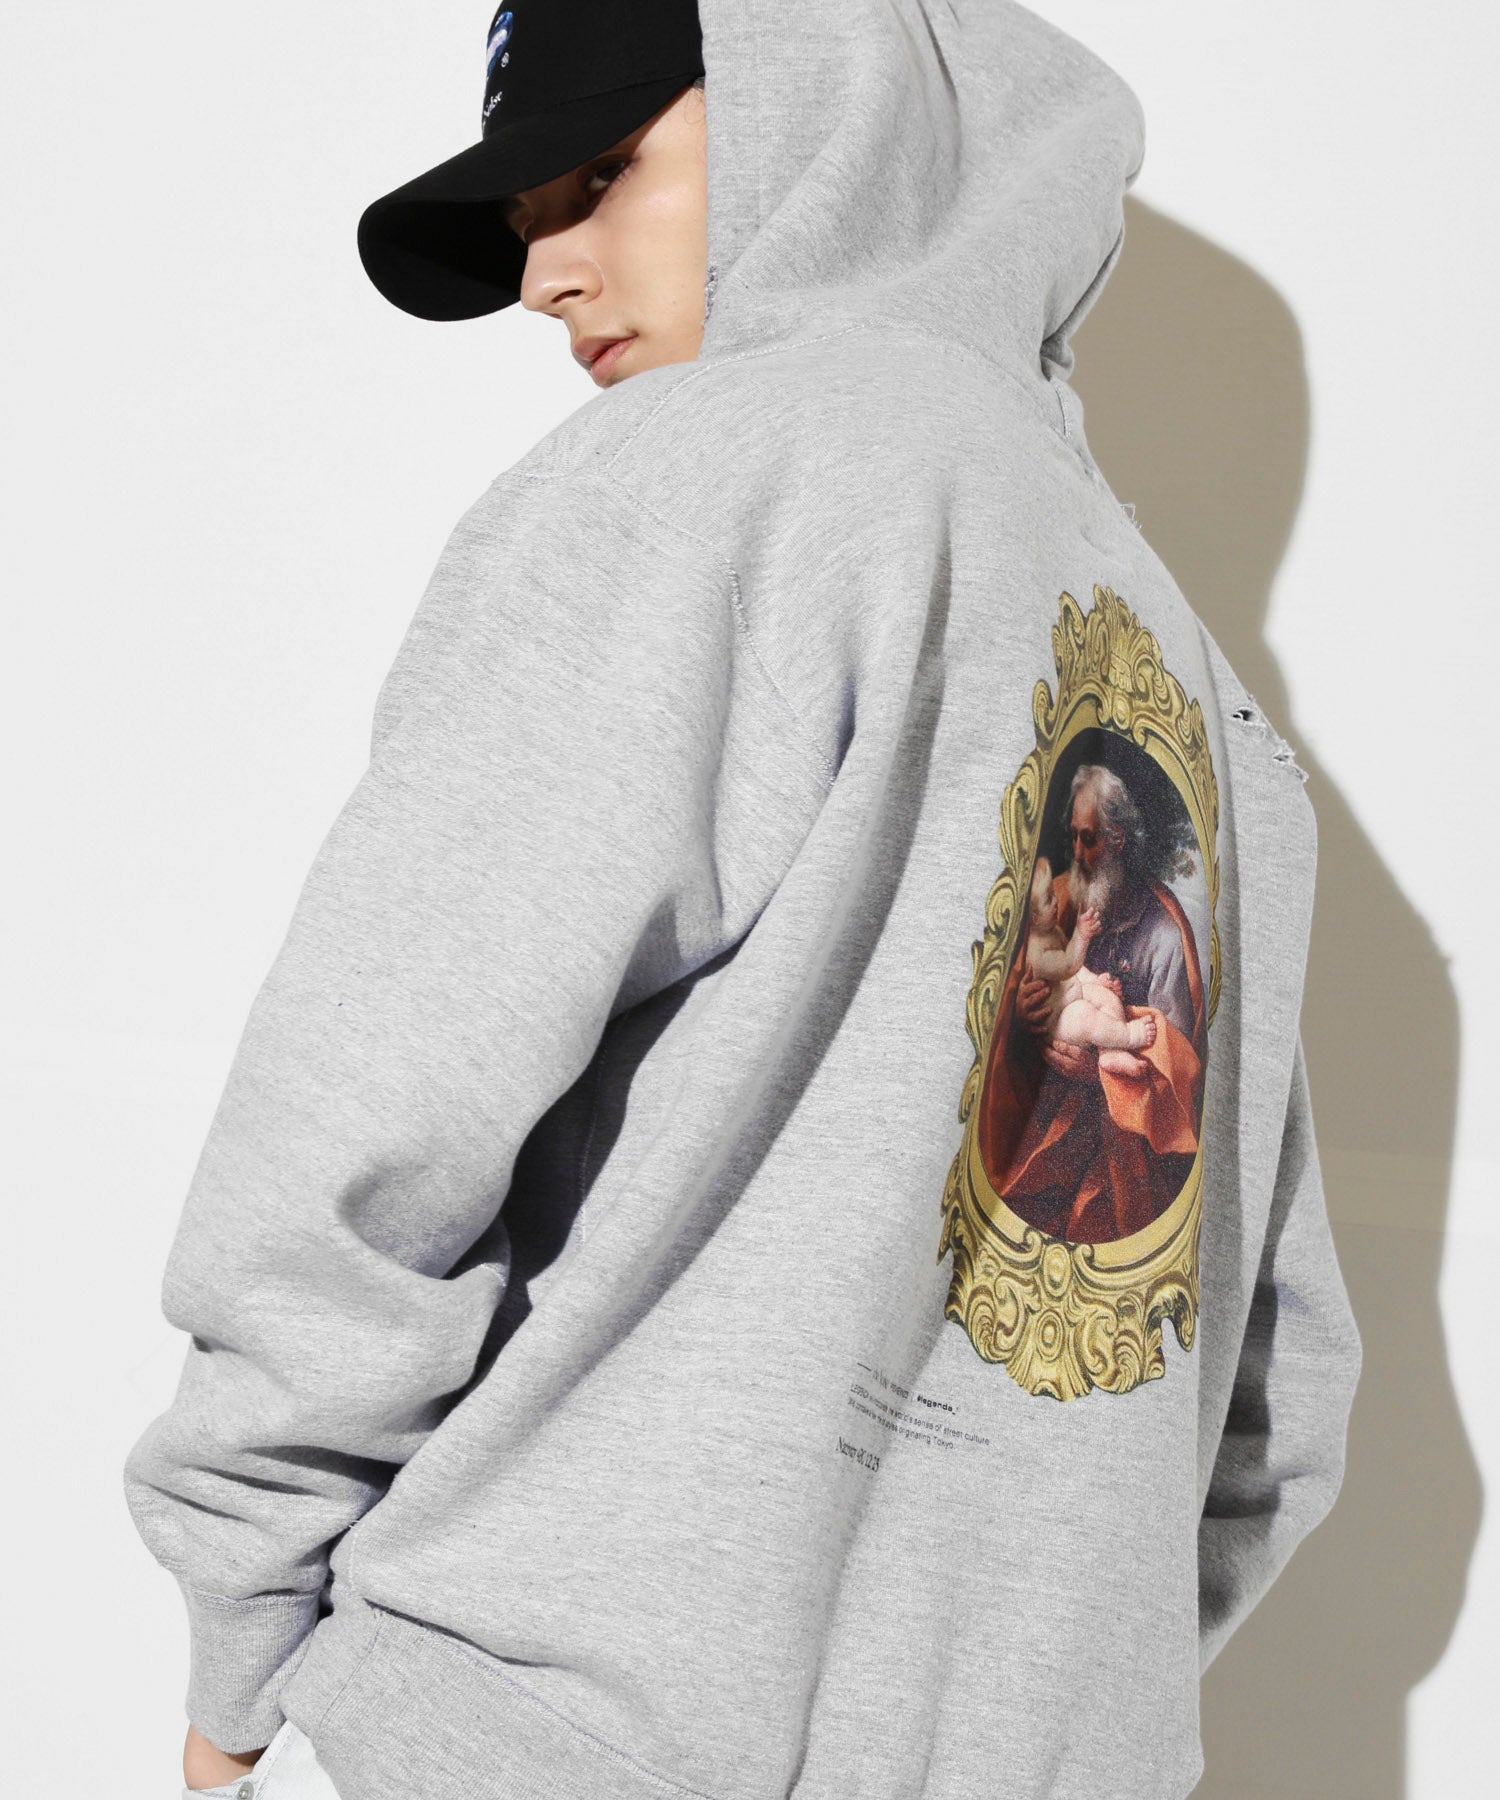 The Nativity Destroyed Hoodie [LEC1131]